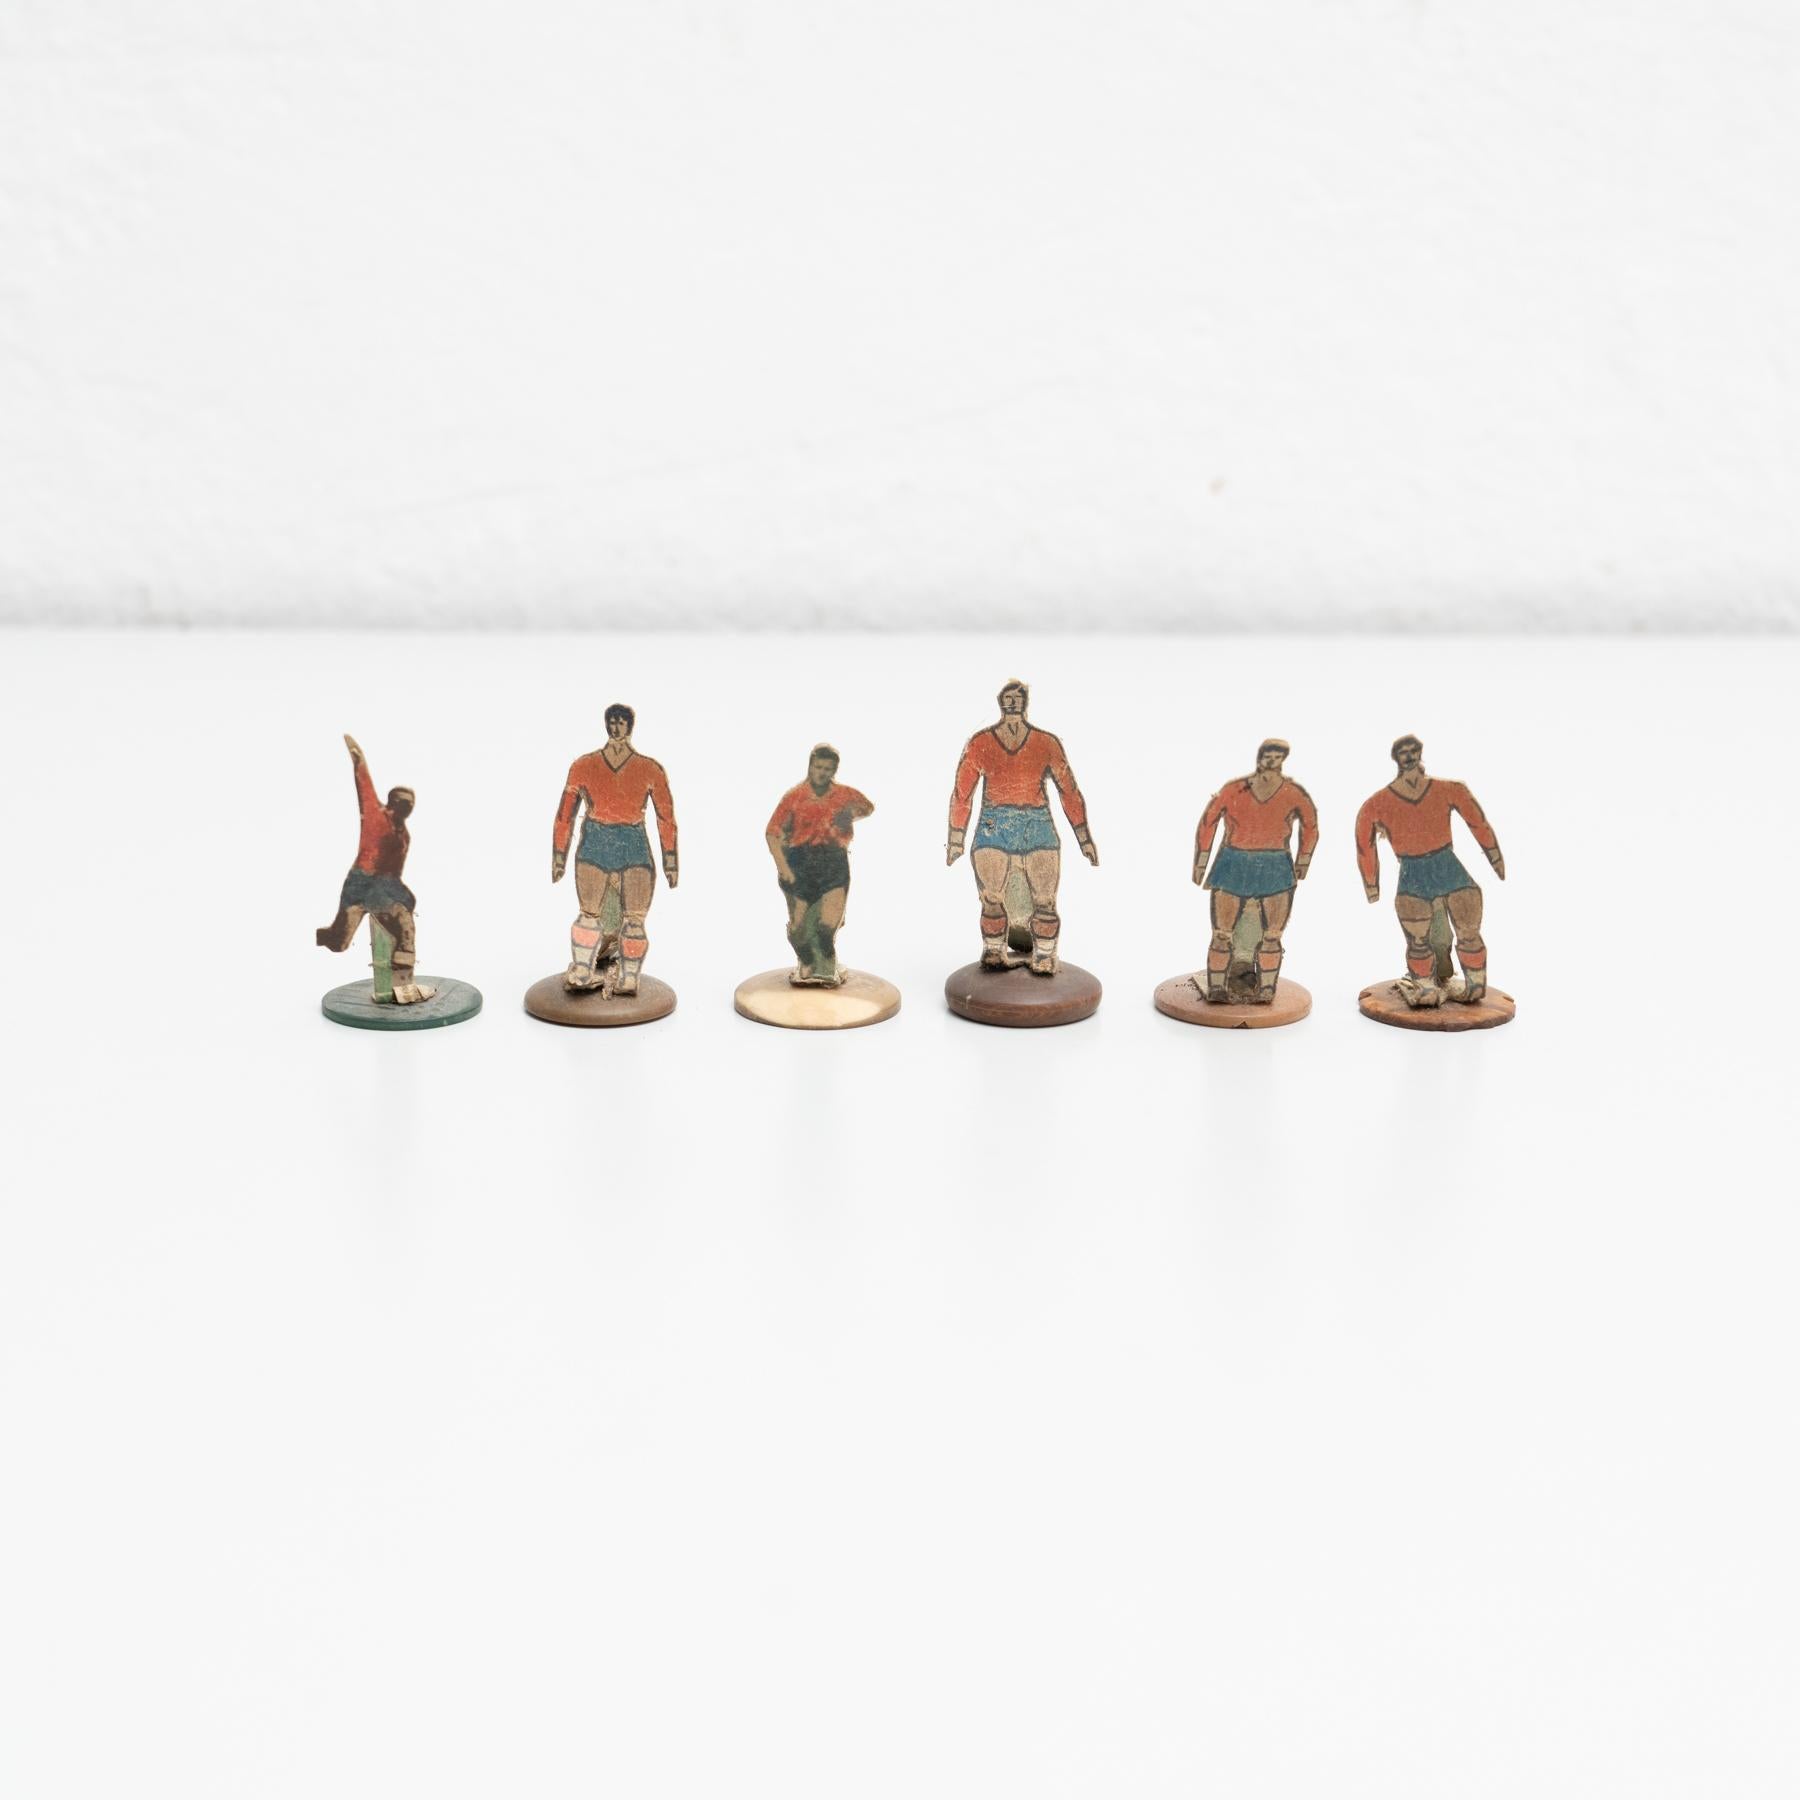 Set of six table button soccer game players. Traditional figures used to play this classic button Spanish game. 

The players are build buy attaching a printed photography or drawing of an actual football soccer player to a clothing button.